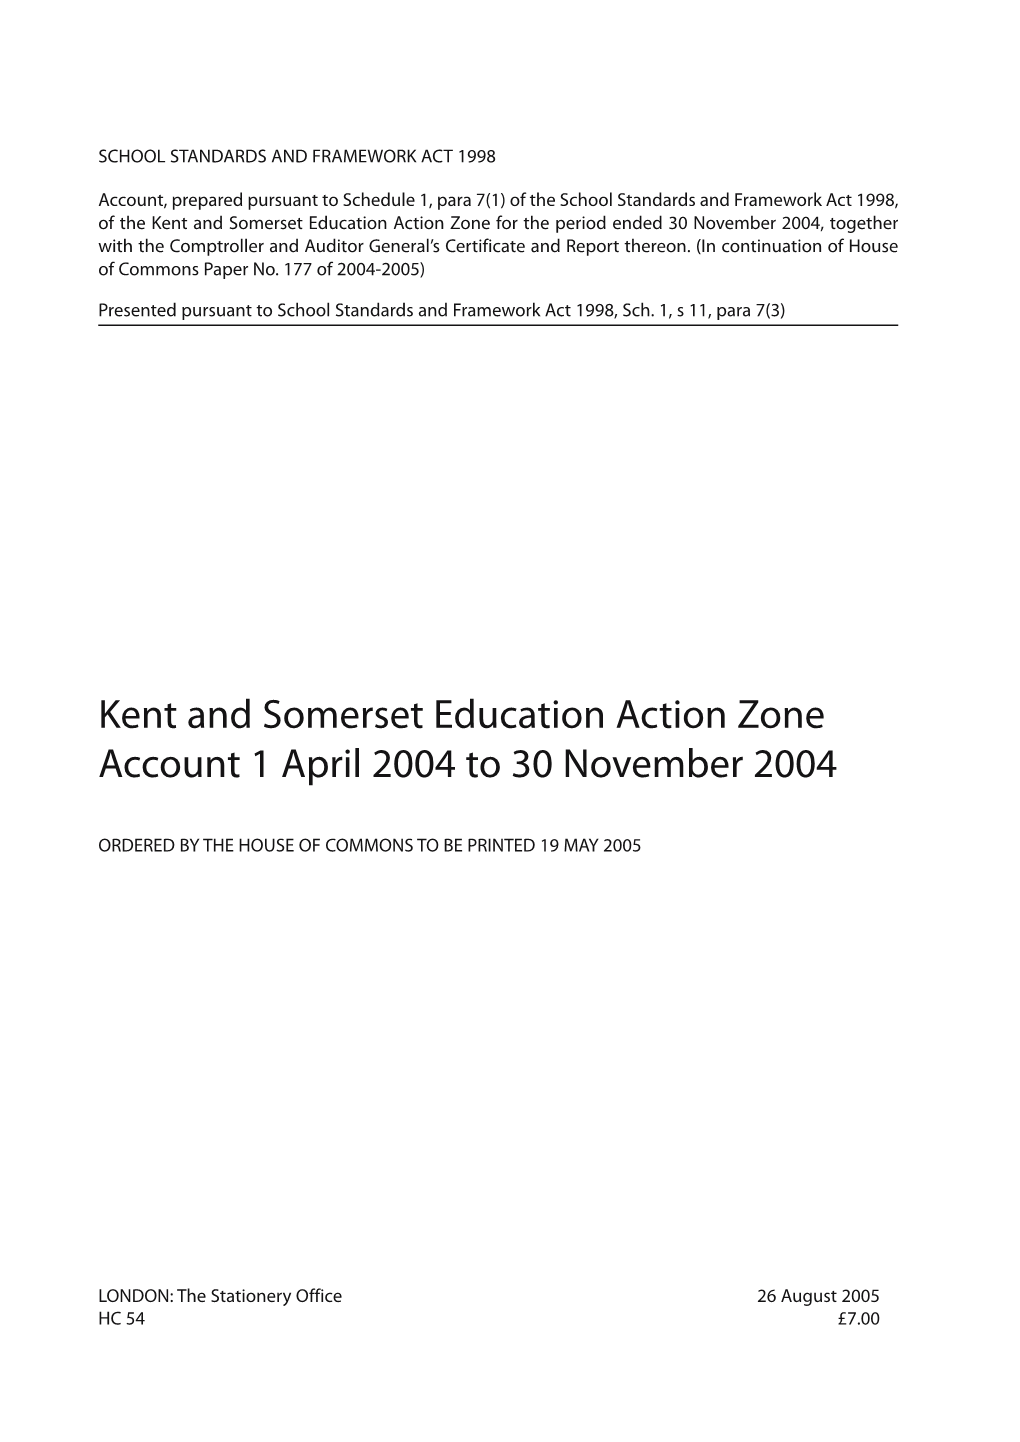 Kent and Somerset Education Action Zone Account 1 April 2004 to 30 November 2004